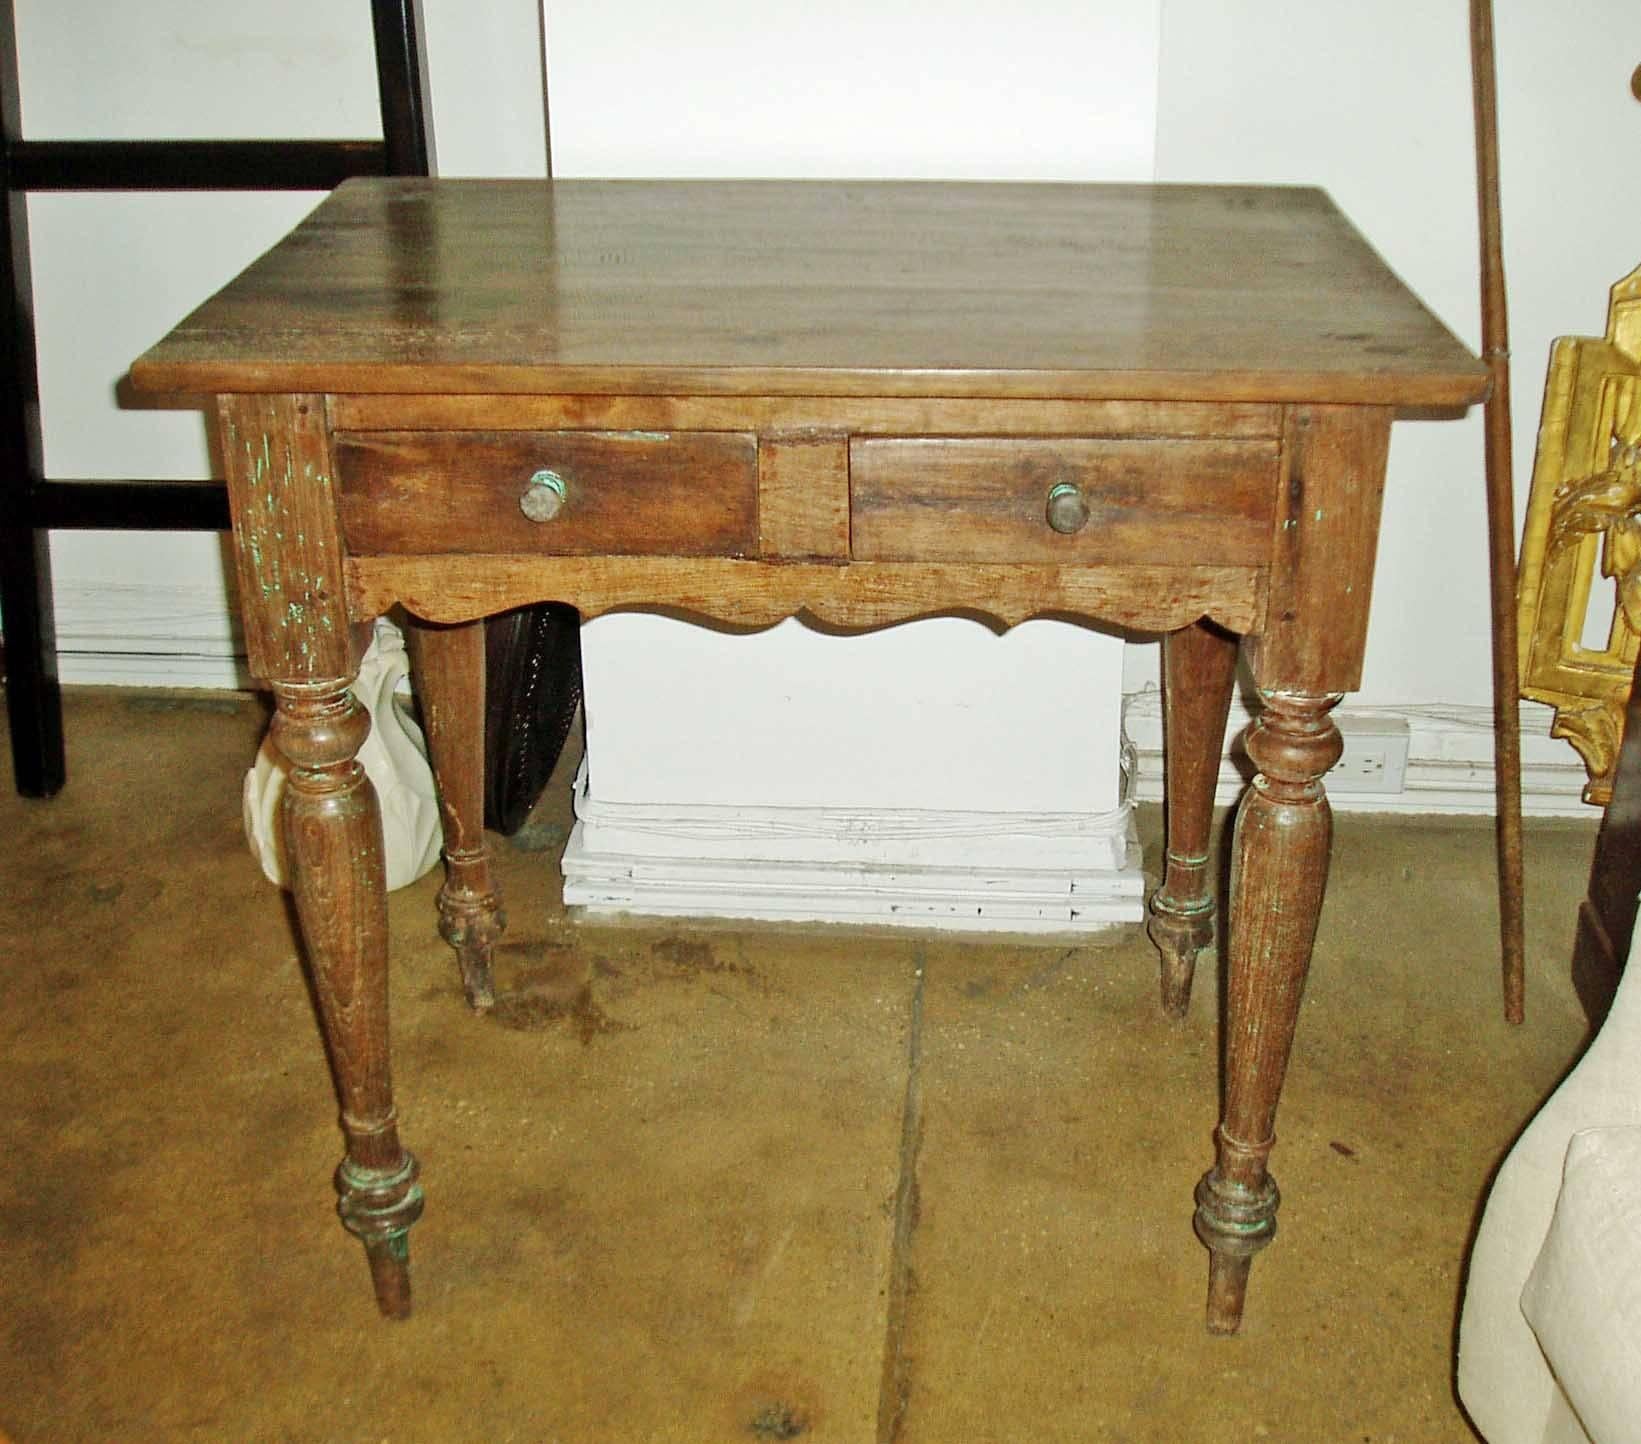 A small side table or console with two drawers, turned legs and scalloped apron, from Indonesia.